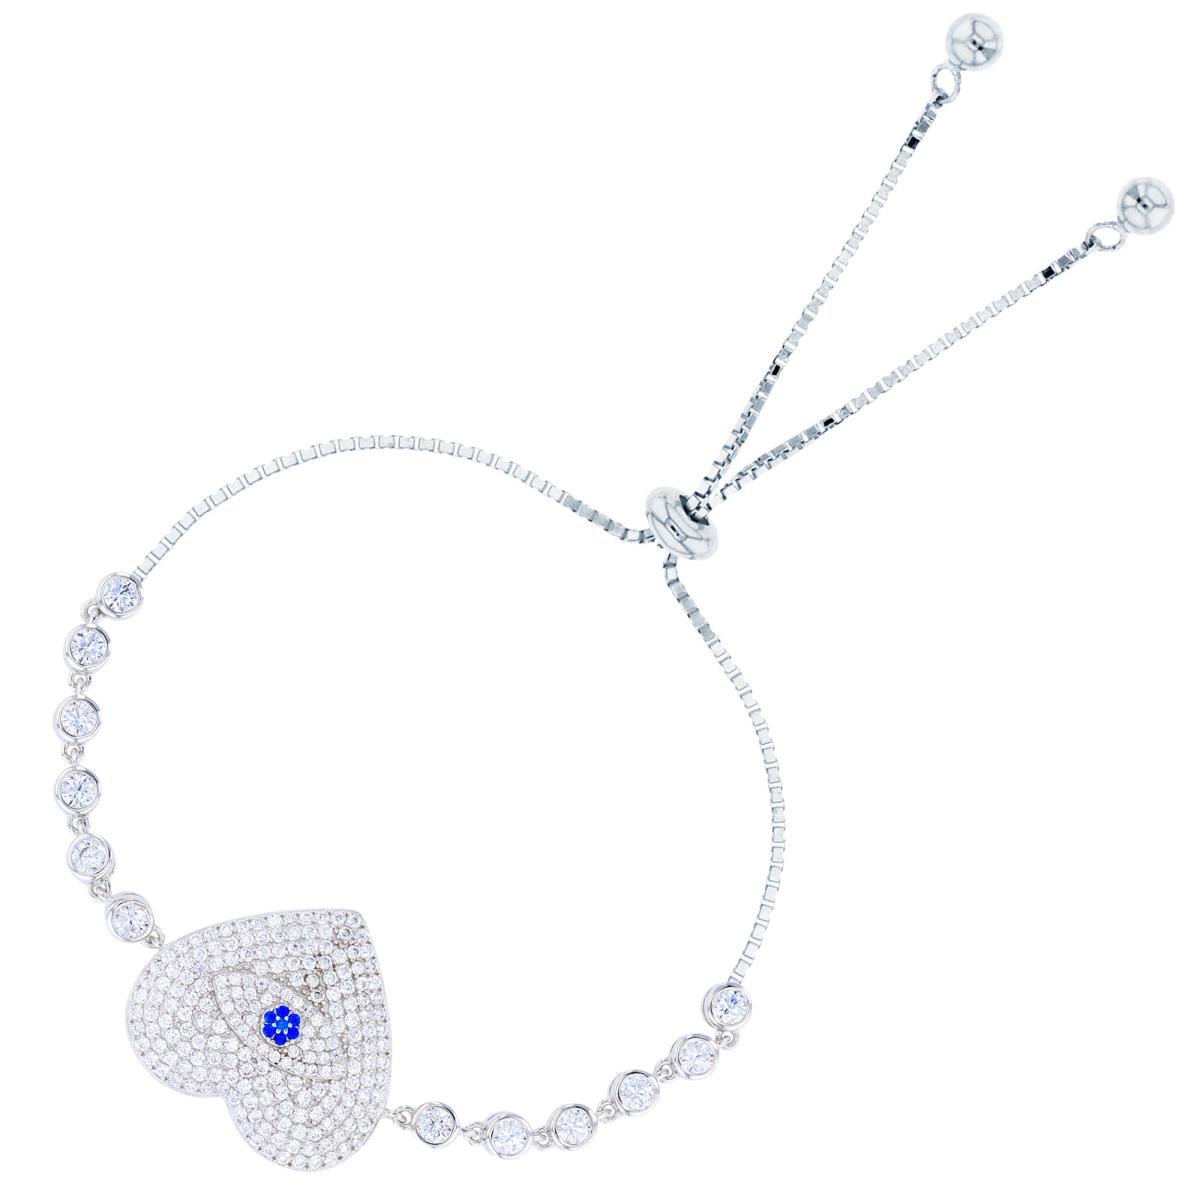 Sterling Silver Rhodium Rd White & #113 Blue Spinel CZ Heart & Rd White CZ Bezel Circles on Sides Adjustable Chained Bolo Bracelet